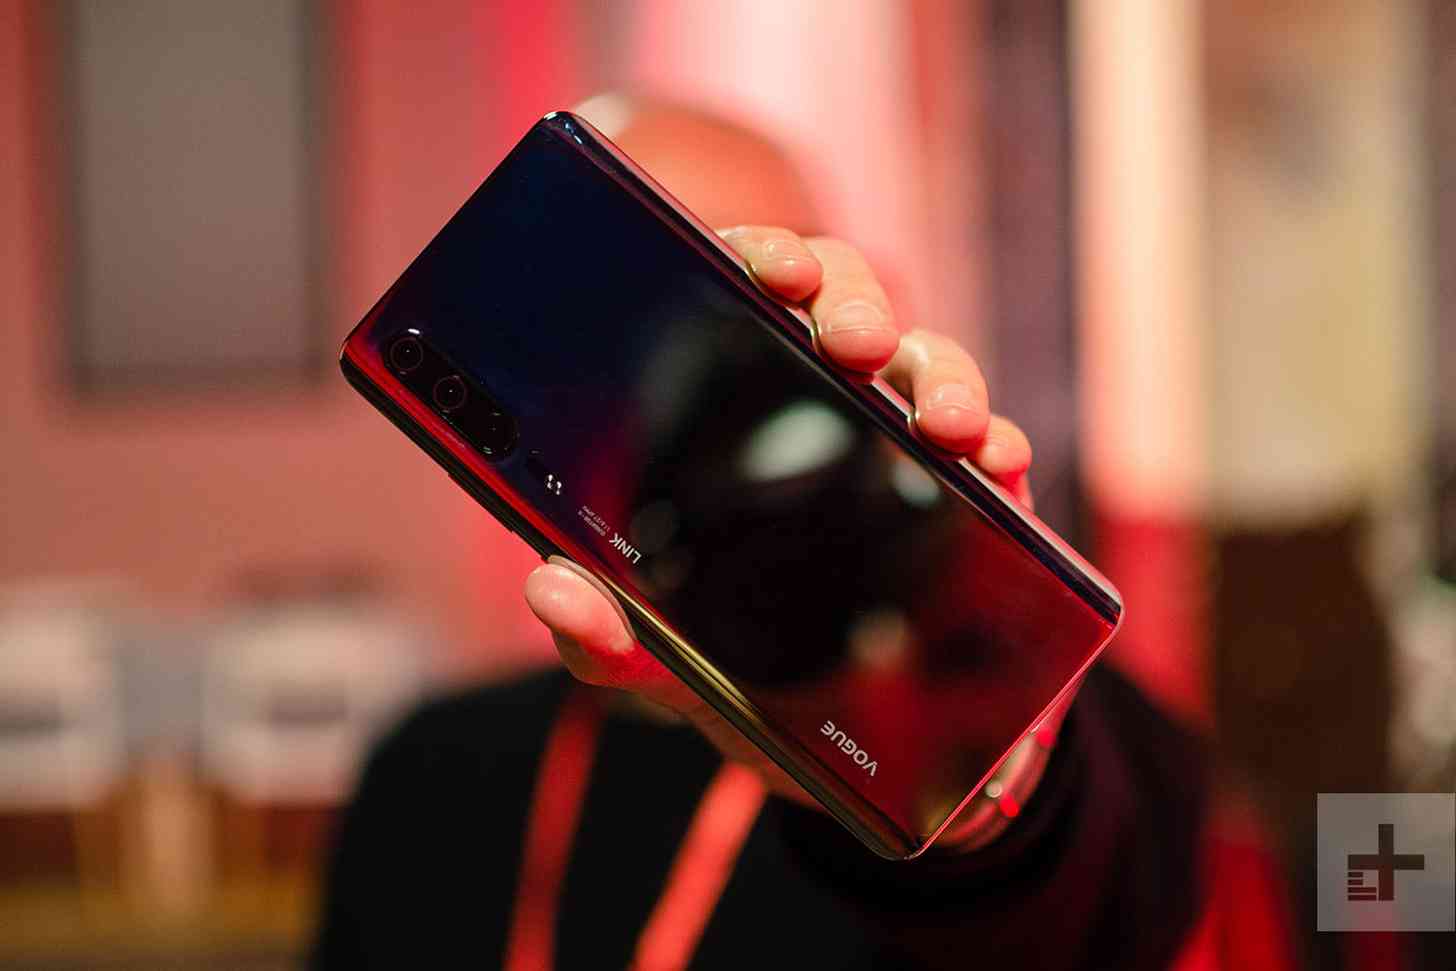 Huawei P30 Pro hands-on